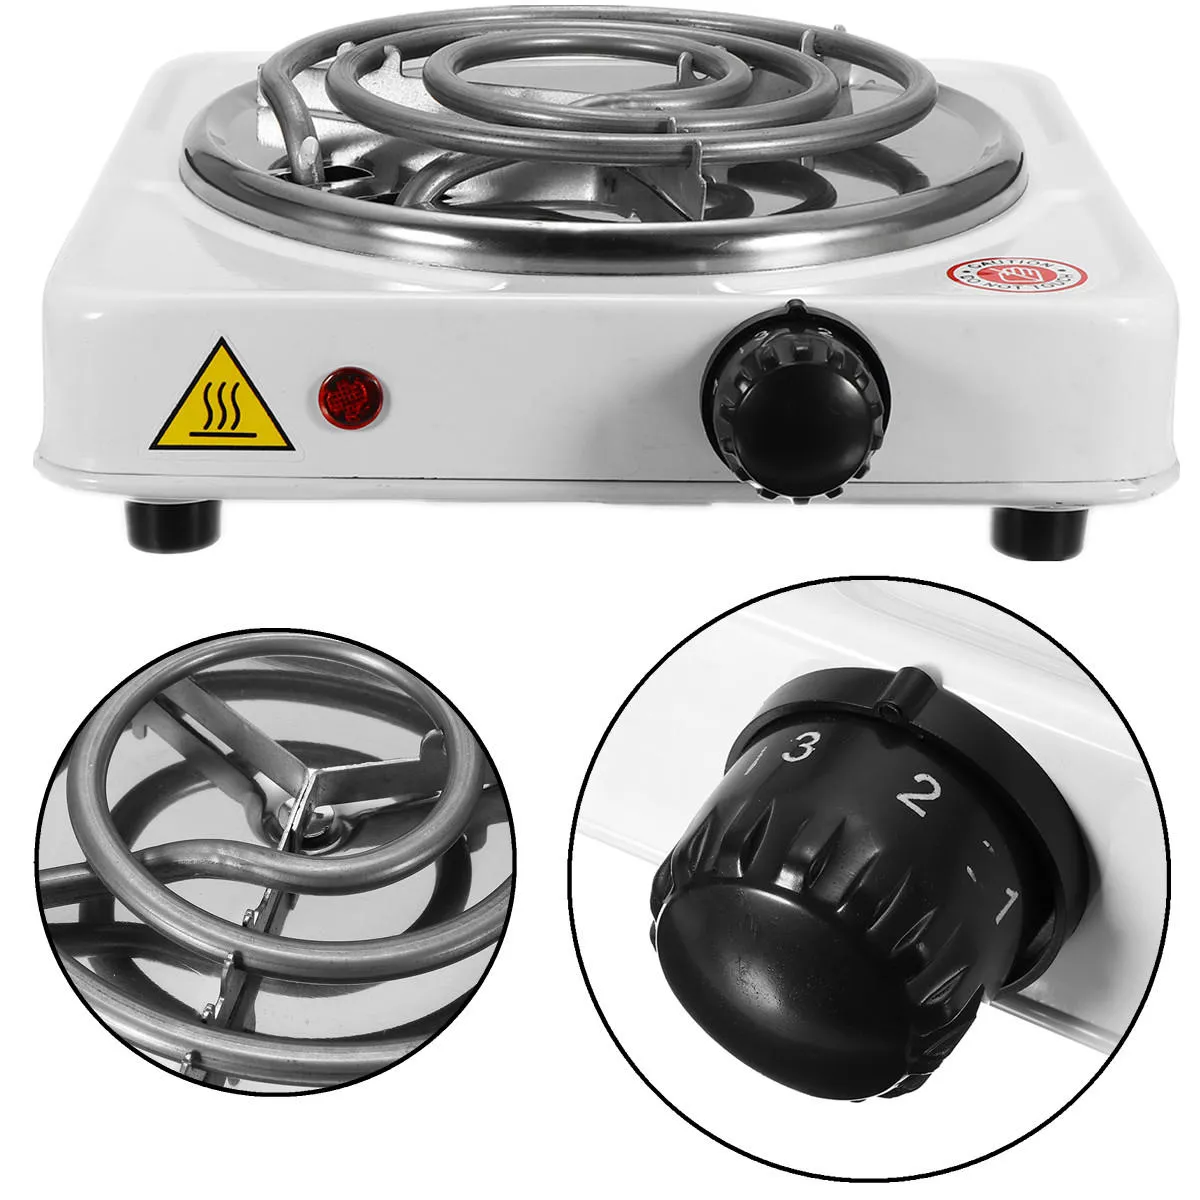 Portable 1000W Electric Hot Plate Burner For Travel Cooking Ideal For Tea,  Coffee Blender, And More 220V From Gearbestshop, $14.58